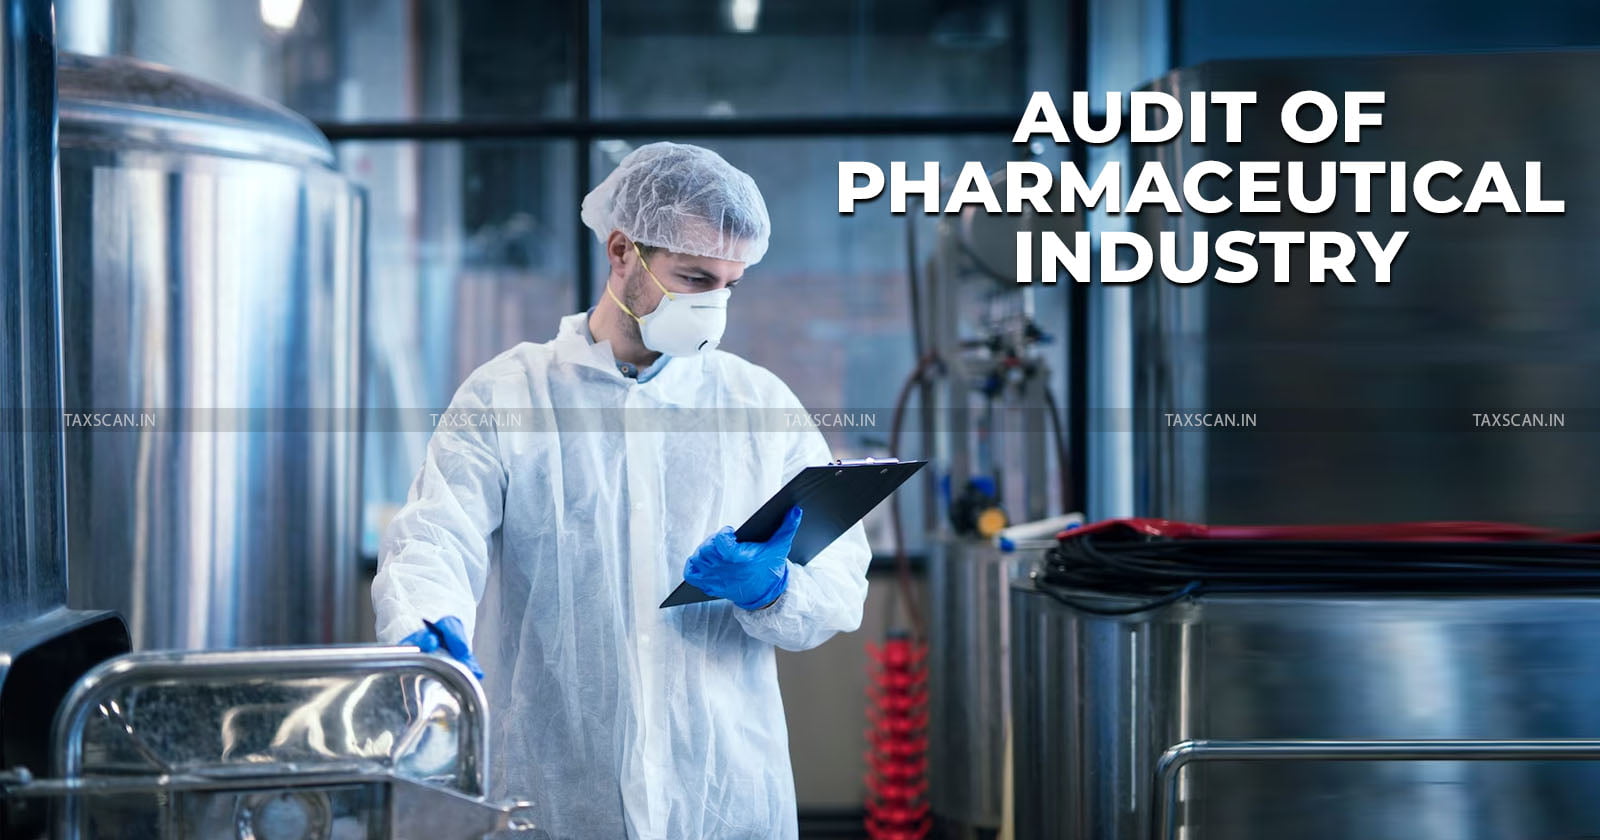 ICAI releases Technical Guide - Technical Guide - ICAI - Internal Audit of Pharmaceutical Industry - Internal Audit -Pharmaceutical Industry - taxscan